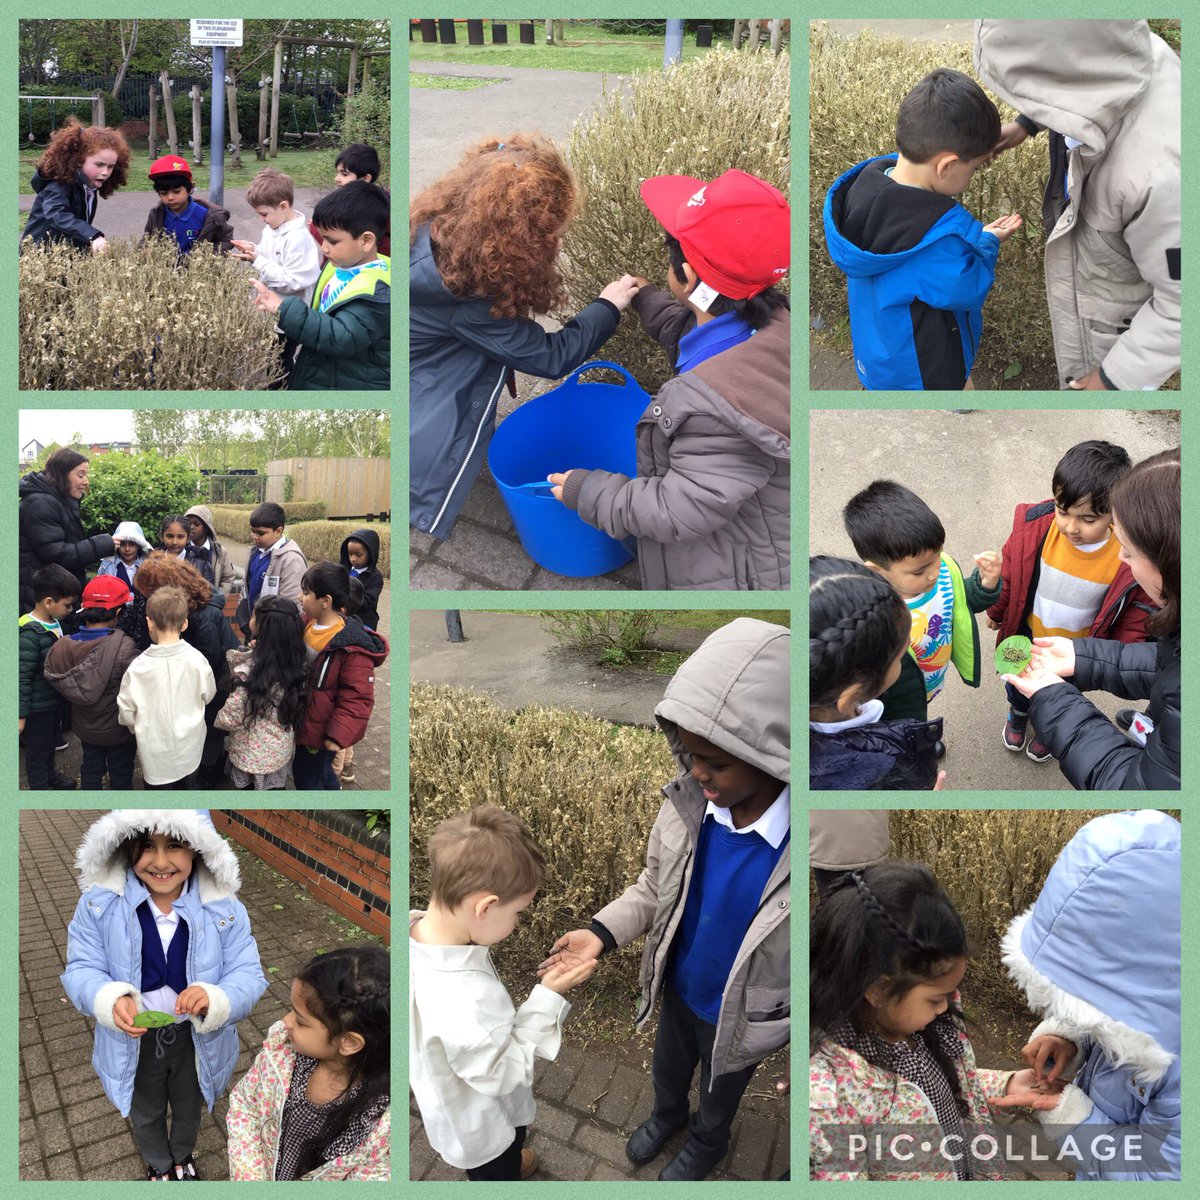 #TeamNursery have been learning all about The Very Hungry Caterpillar so #Team2CW have kindly shown us all the caterpillars they have in their outdoor garden! 🐛💙 
#WalesOutdoorLearningWeek